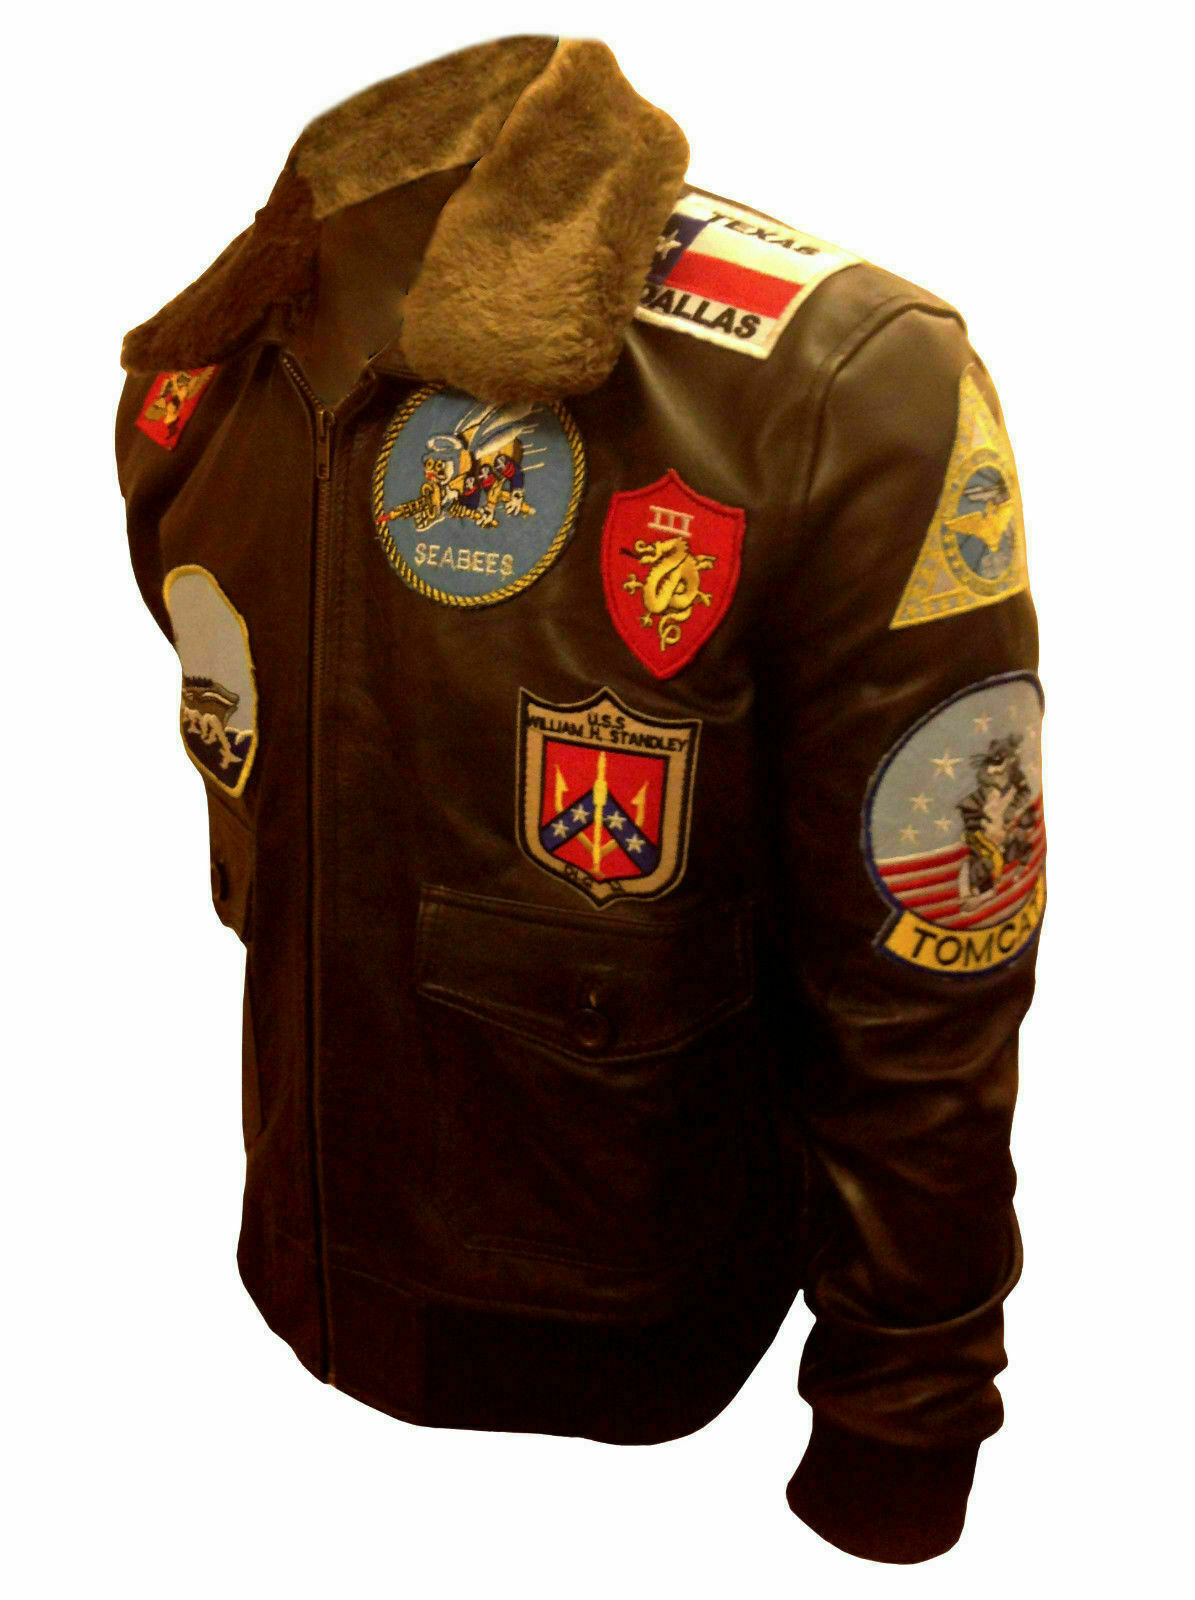 TOP GUN TOM CRUISE A2 (2020) JET PETE MAVERICK FIGHTER BOMBER COW LEATHER JACKET